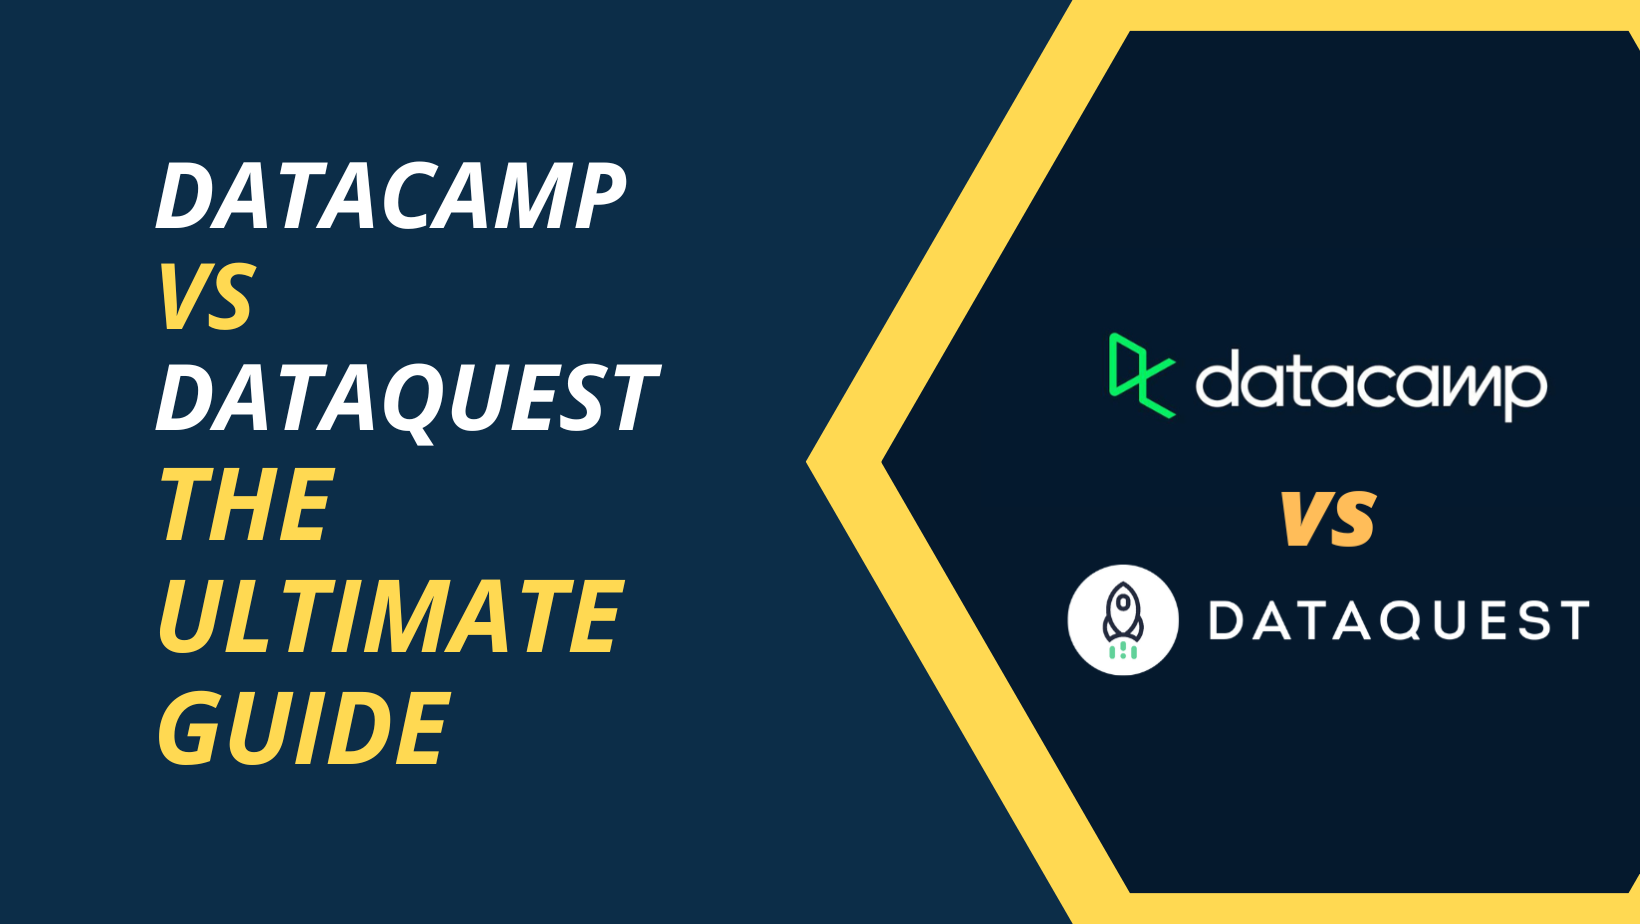 Datacamp vs Dataquest - Which one is better?